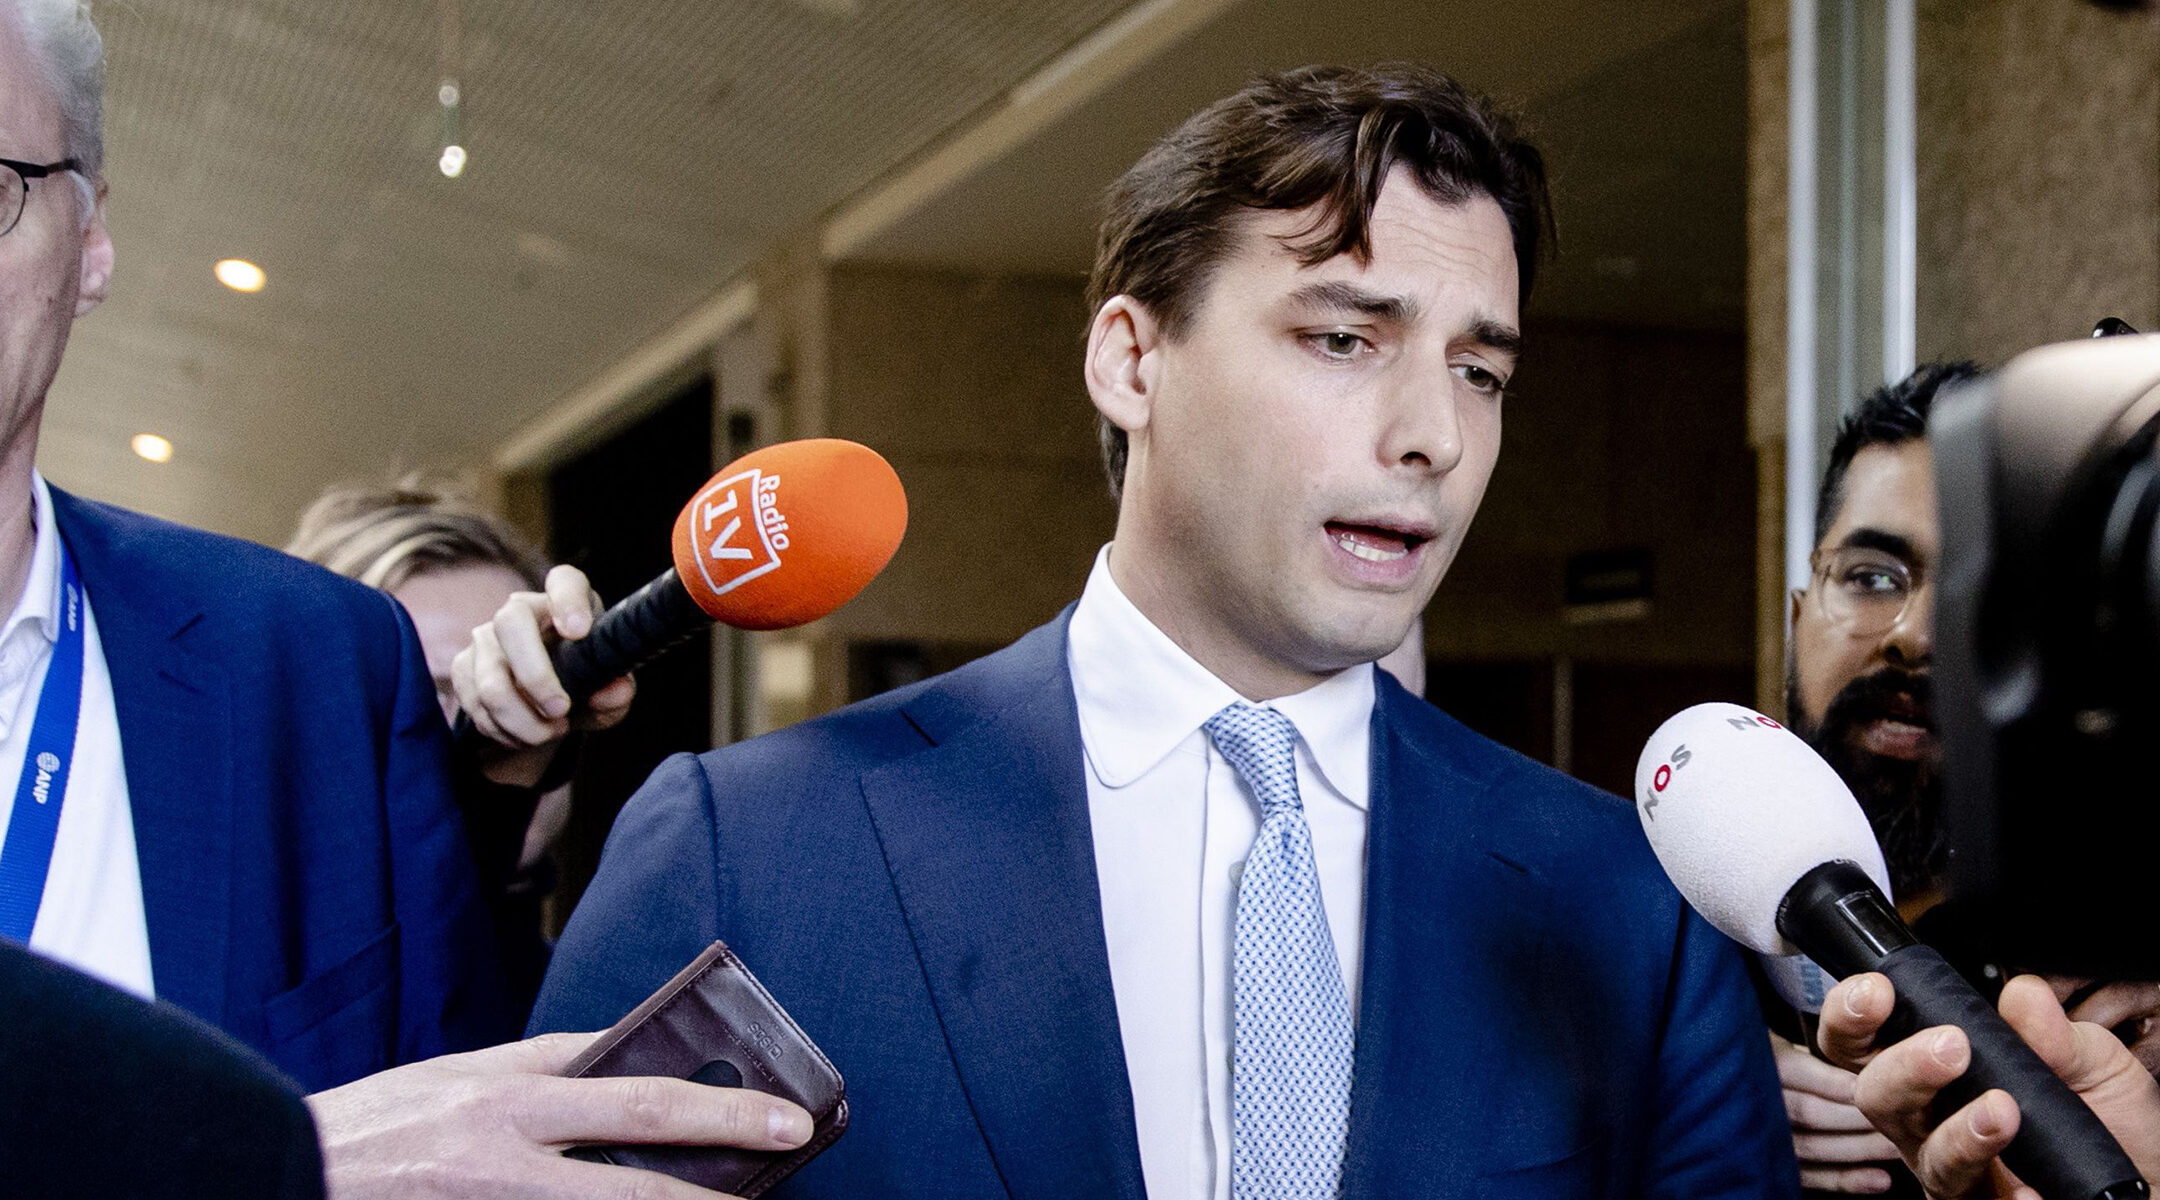 Dutch right-wing leader Thierry Baudet